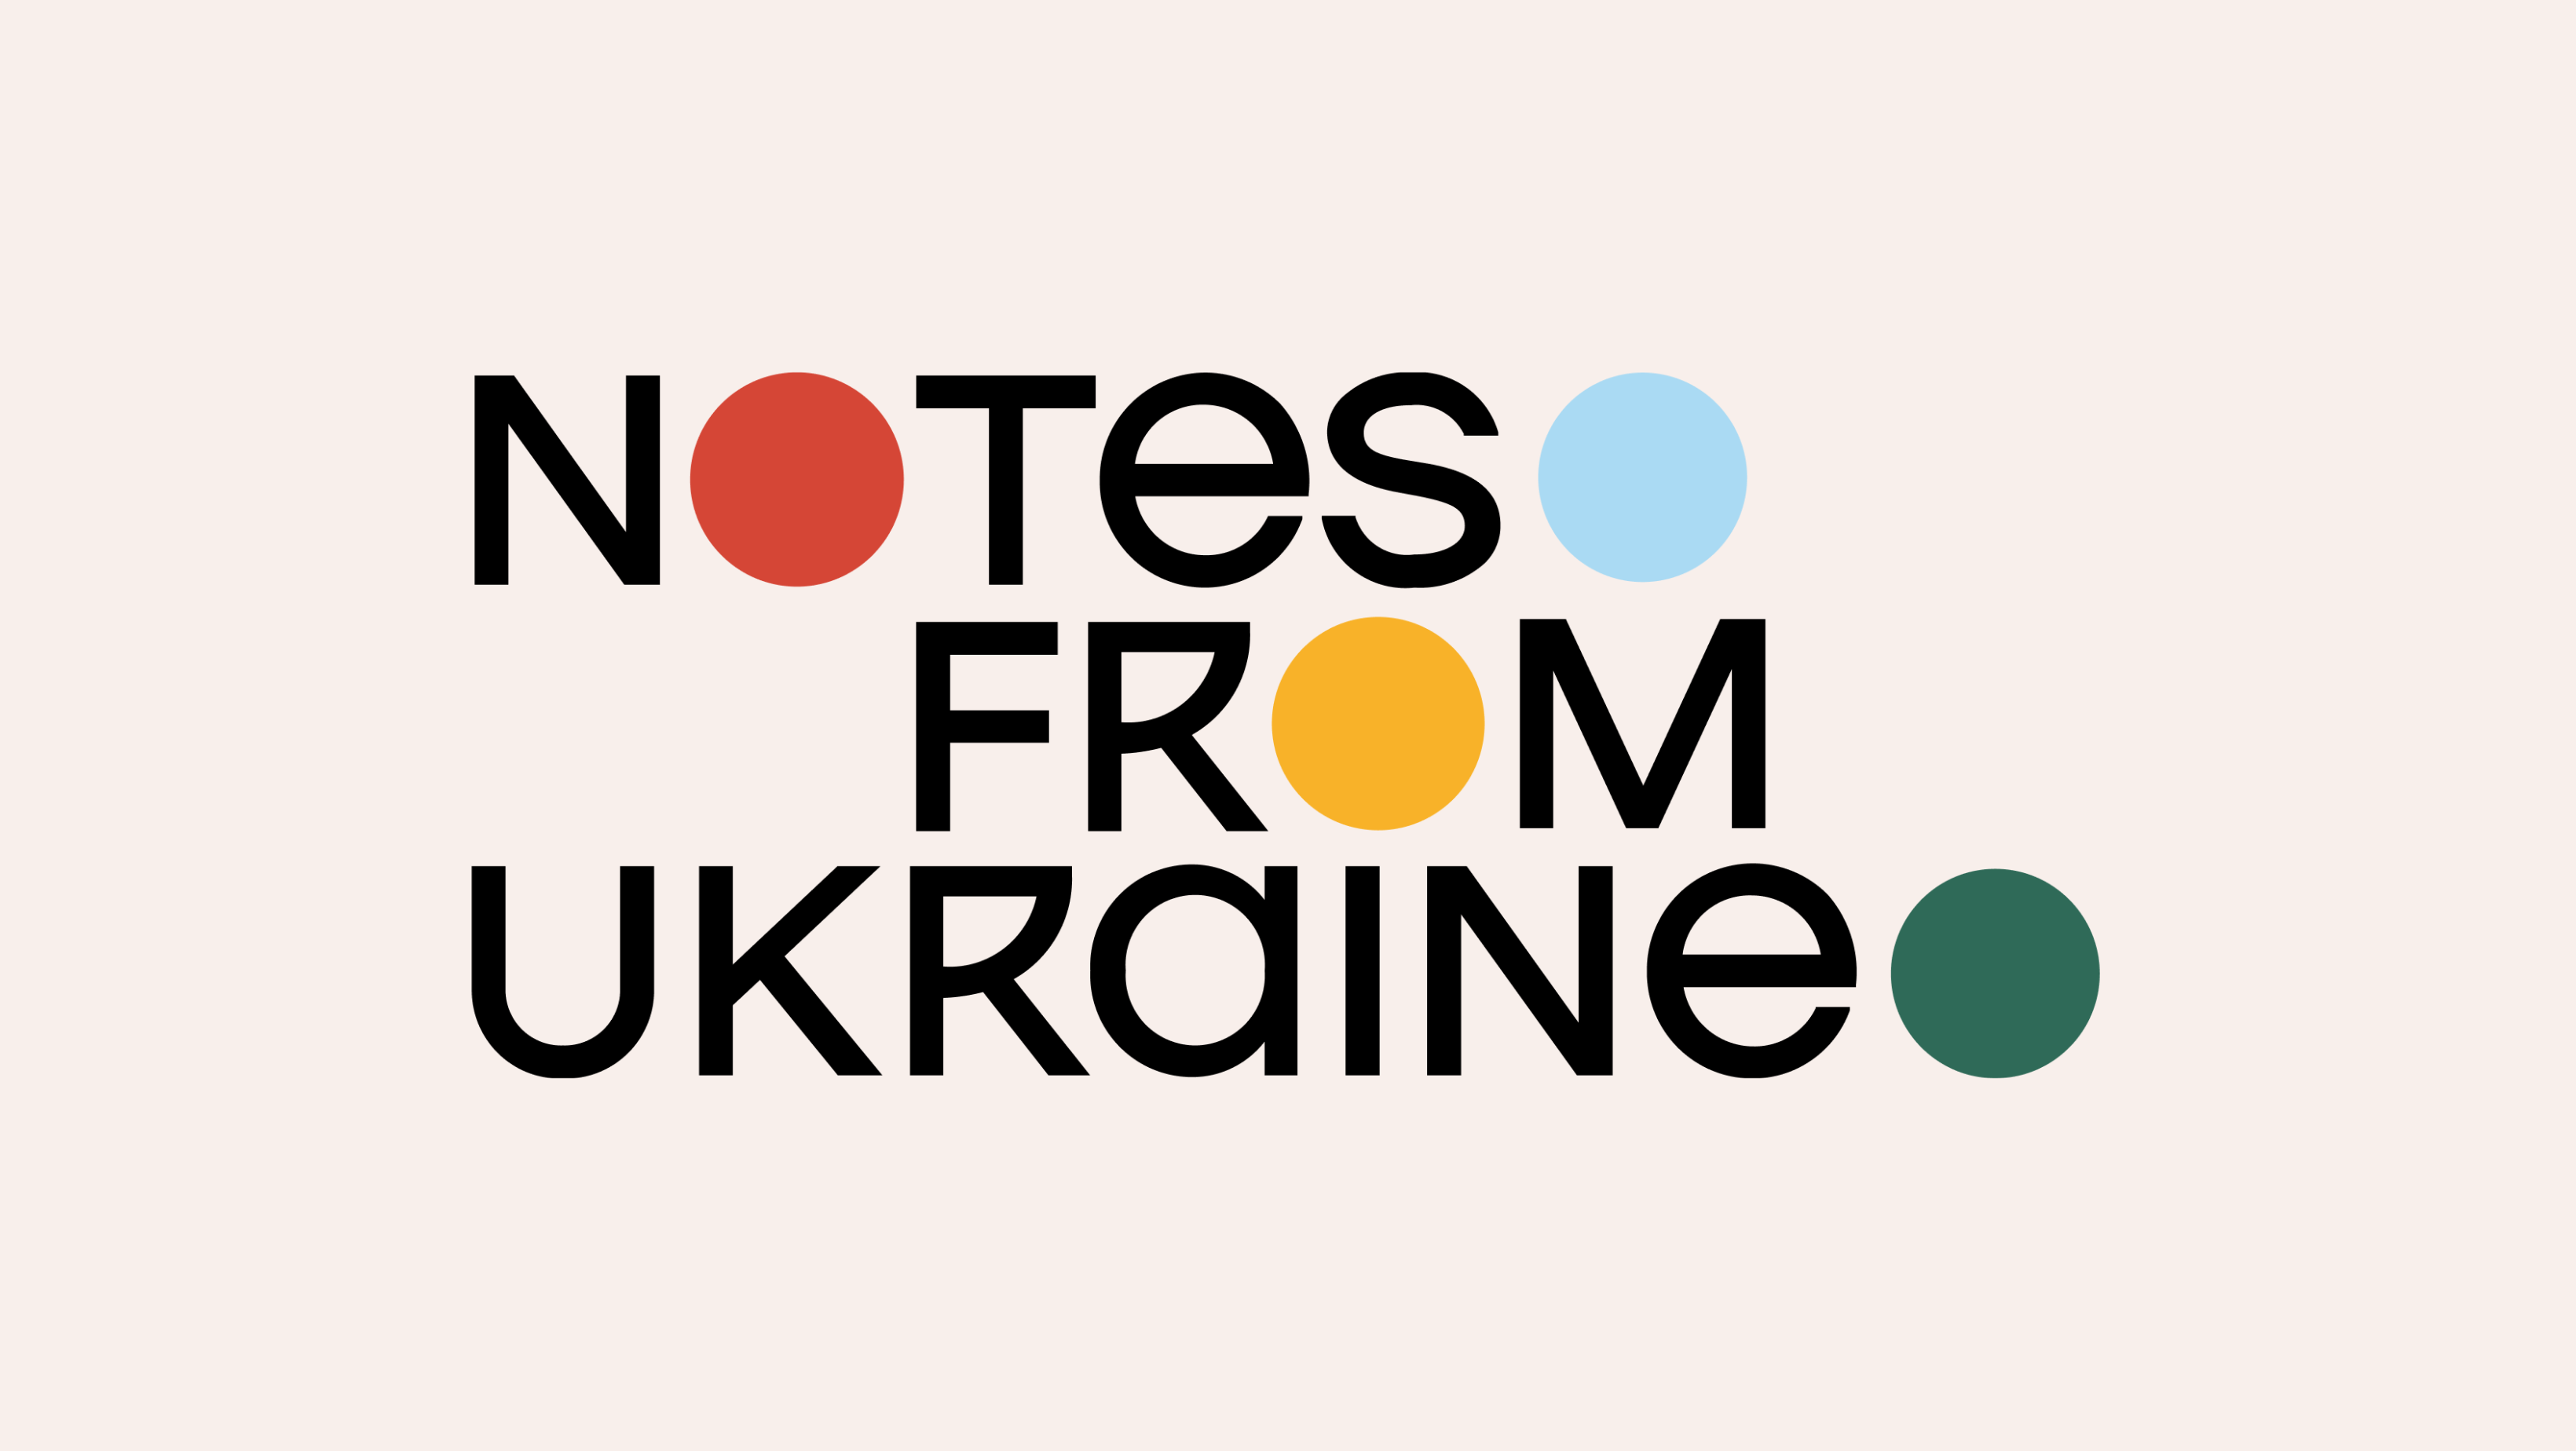 Notes from Ukraine